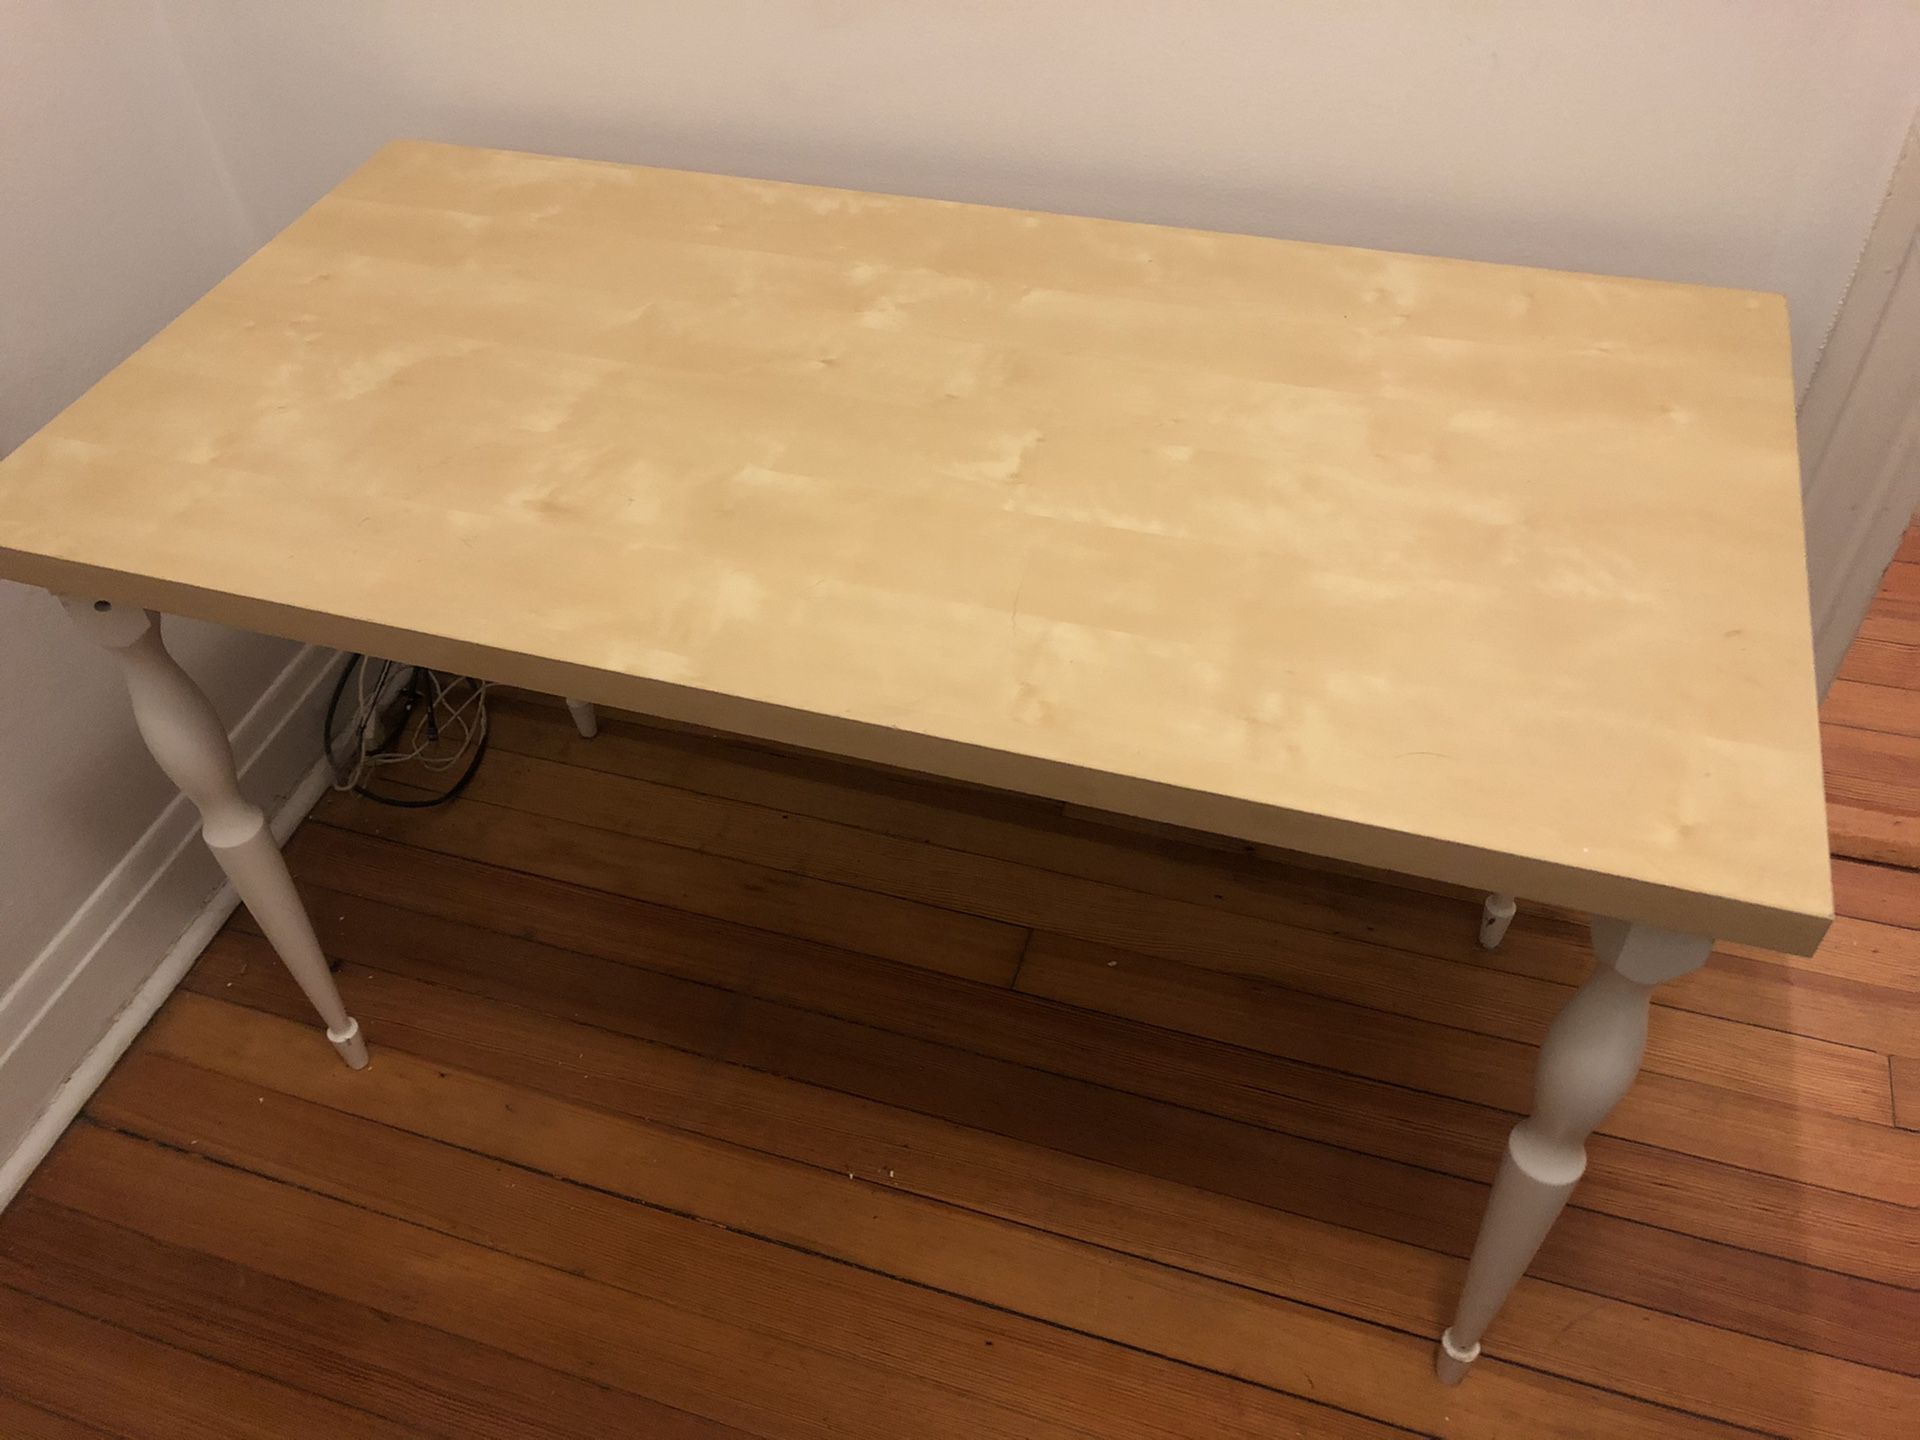 IKEA desk/table with turn style legs